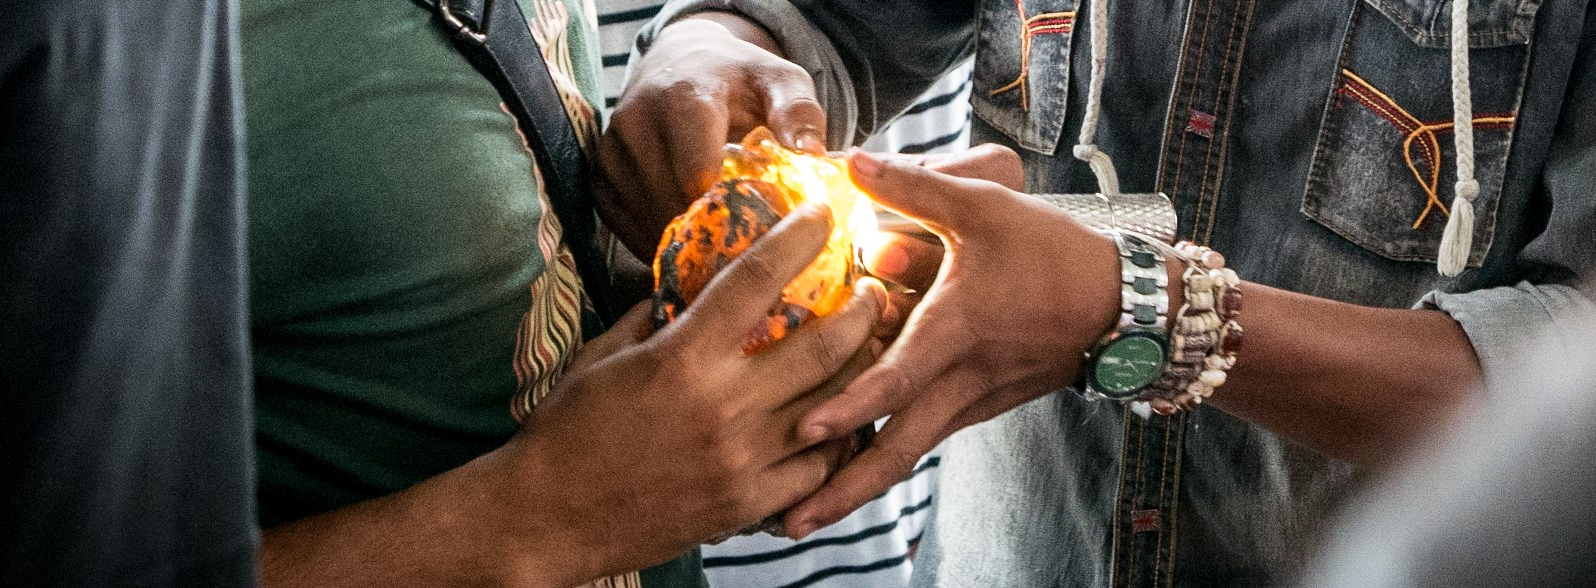 Two people holding a lump of amber between them in their hands, one of them is shining light into the amber with a flashlight causing it to glow